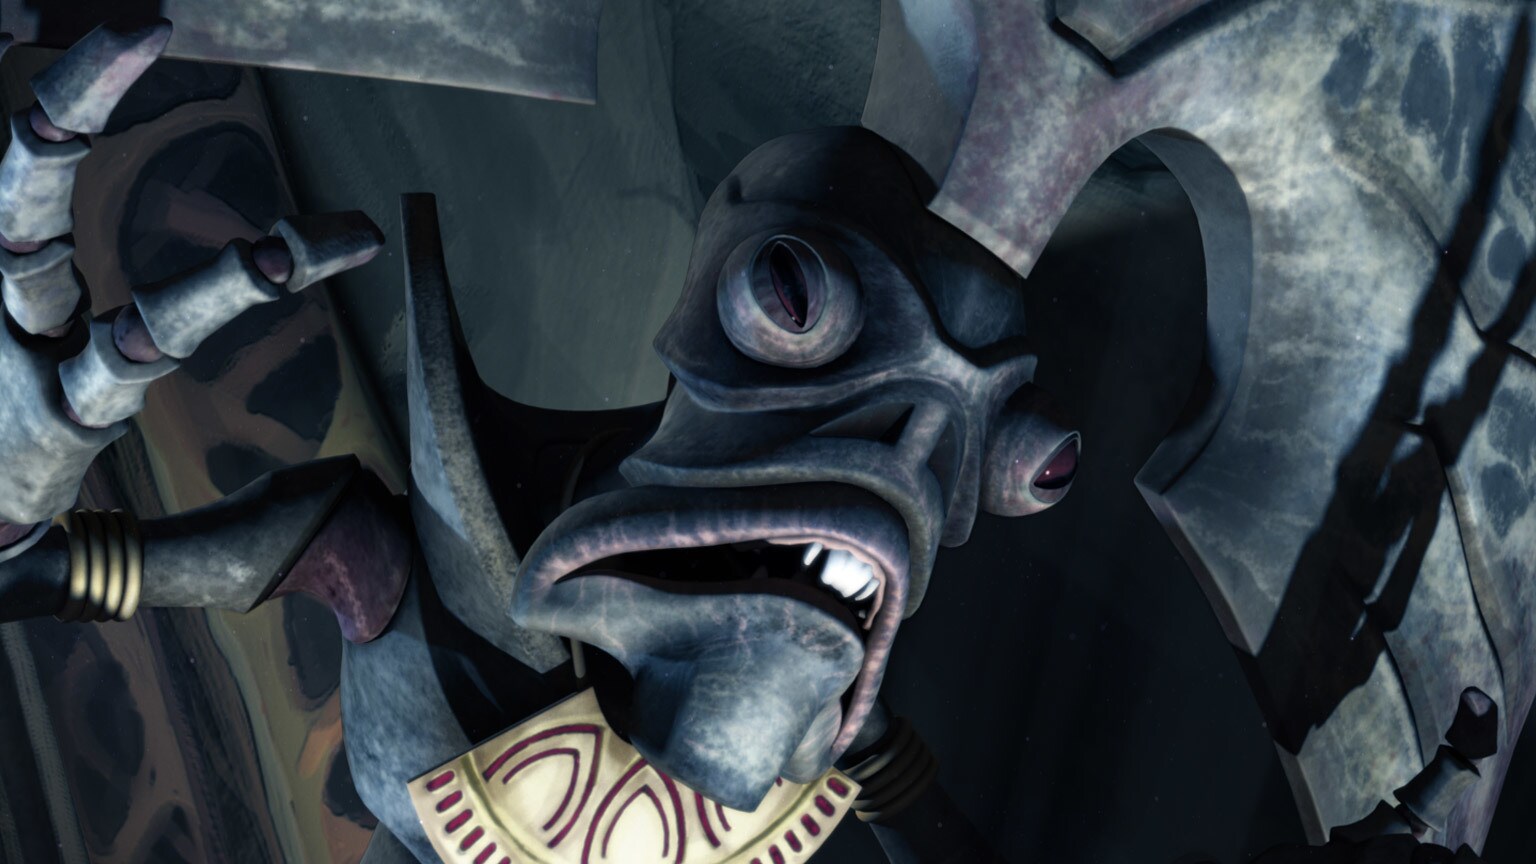 The Clone Wars Rewatch: A "Legacy of Terror" in the Tunnels of Geonosis